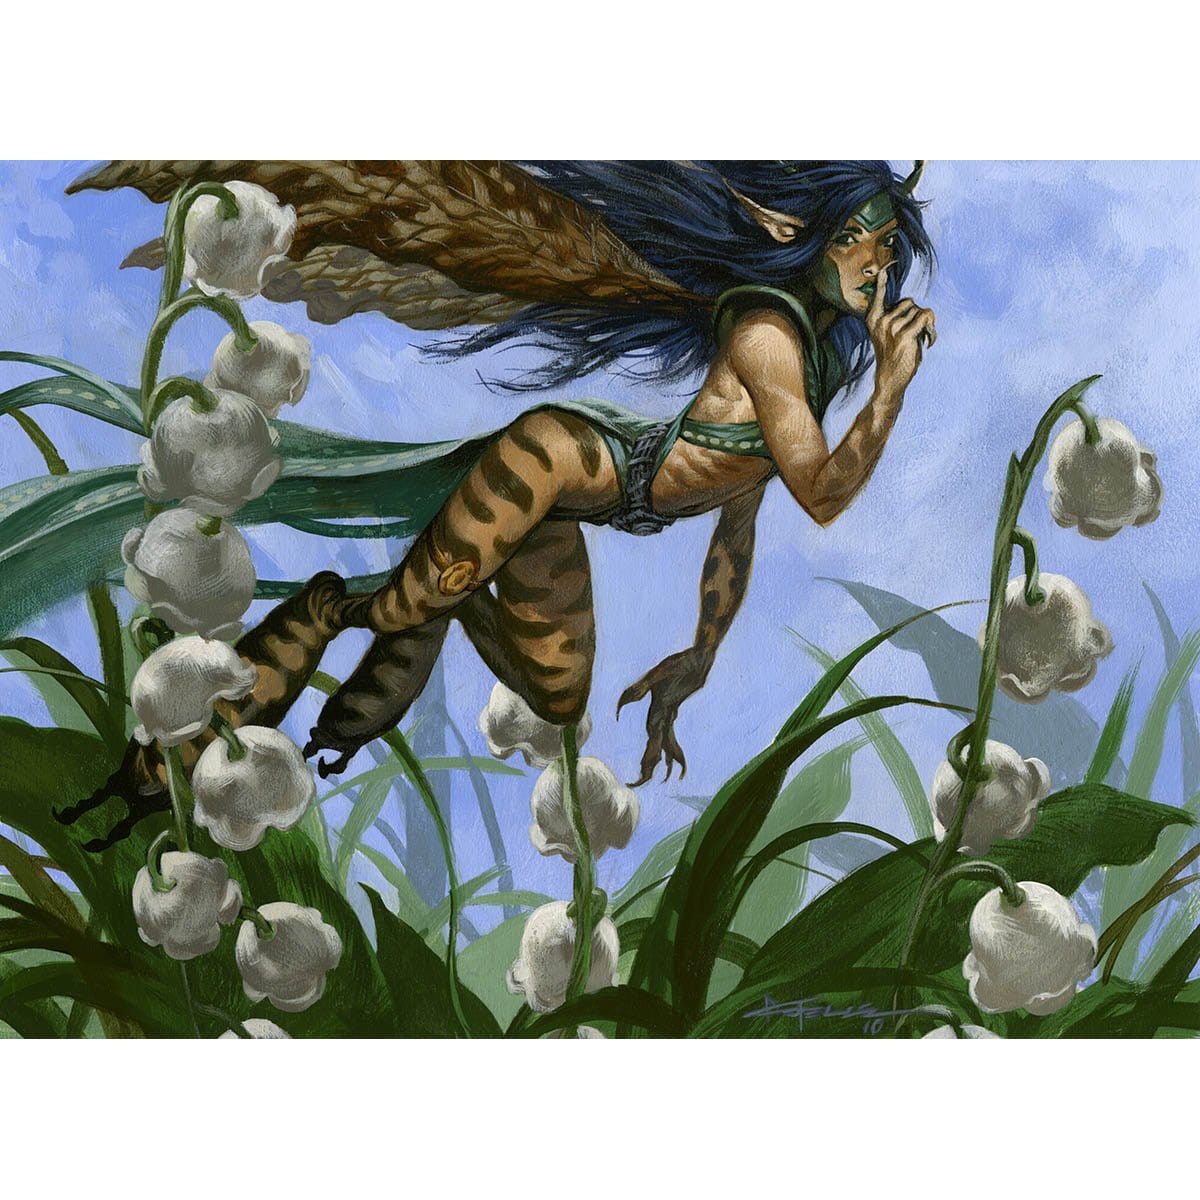 Spellstutter Sprite Print - Print - Original Magic Art - Accessories for Magic the Gathering and other card games